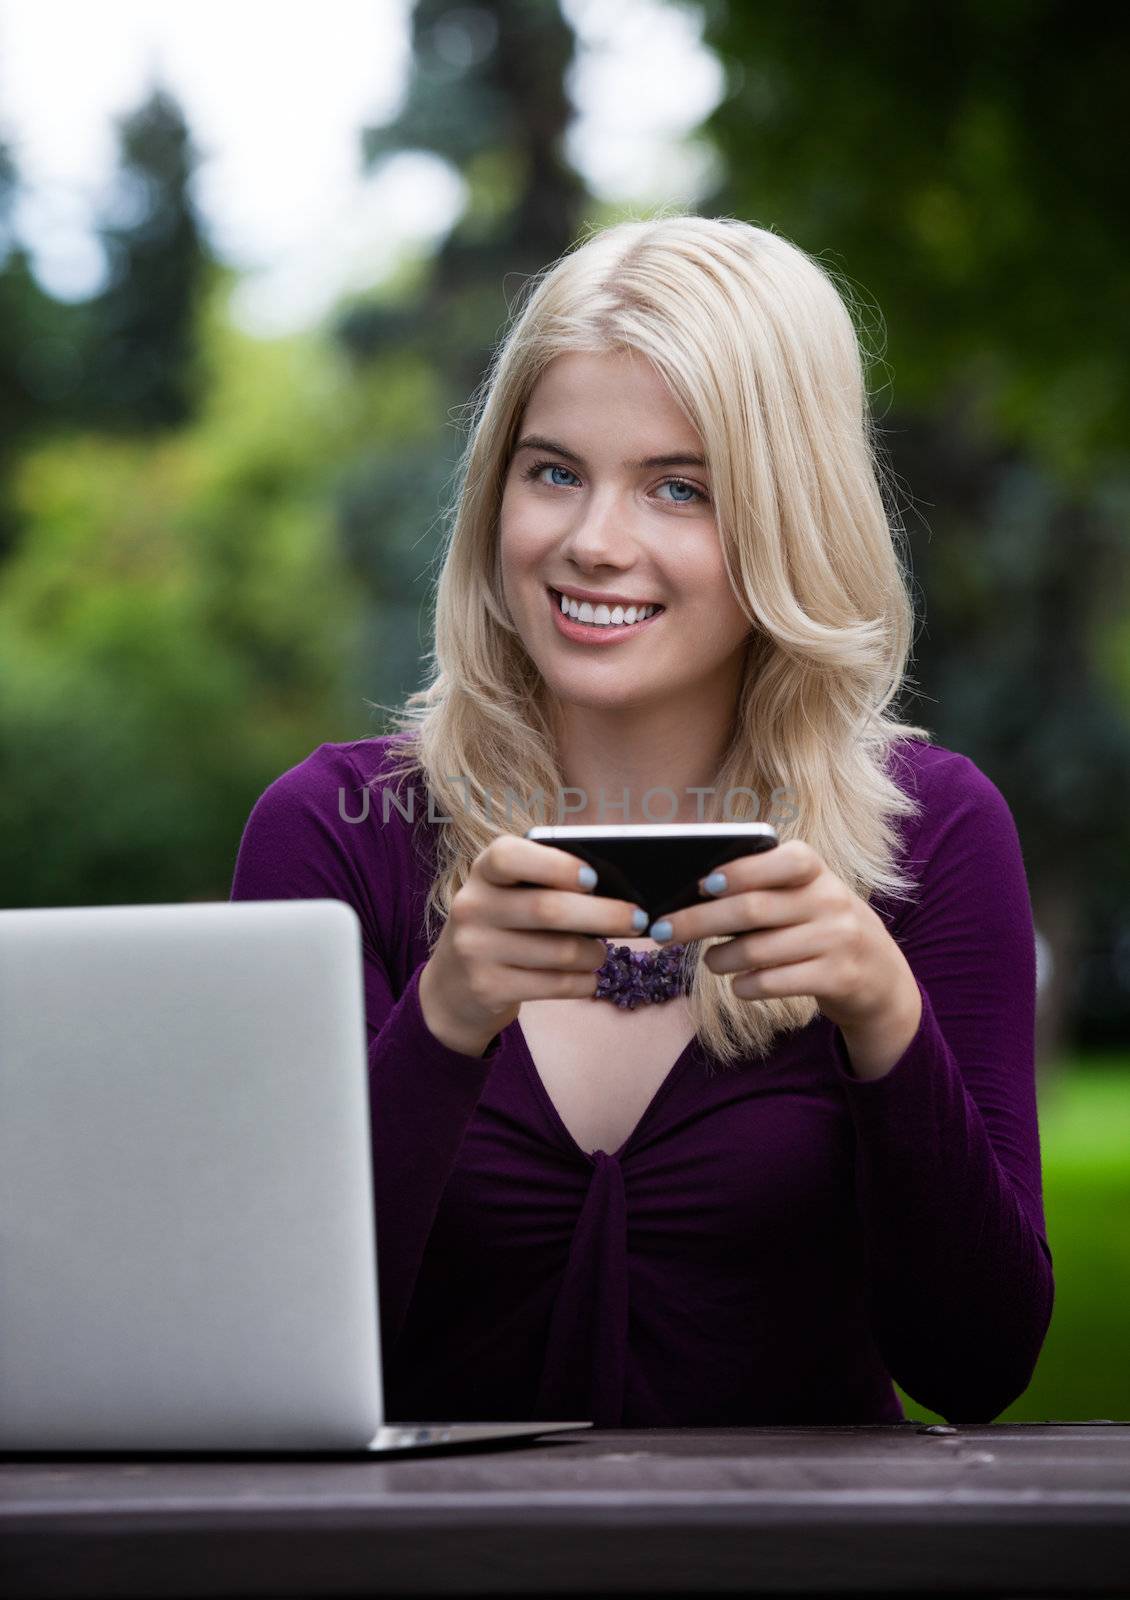 Young Woman with Smart Phone by leaf